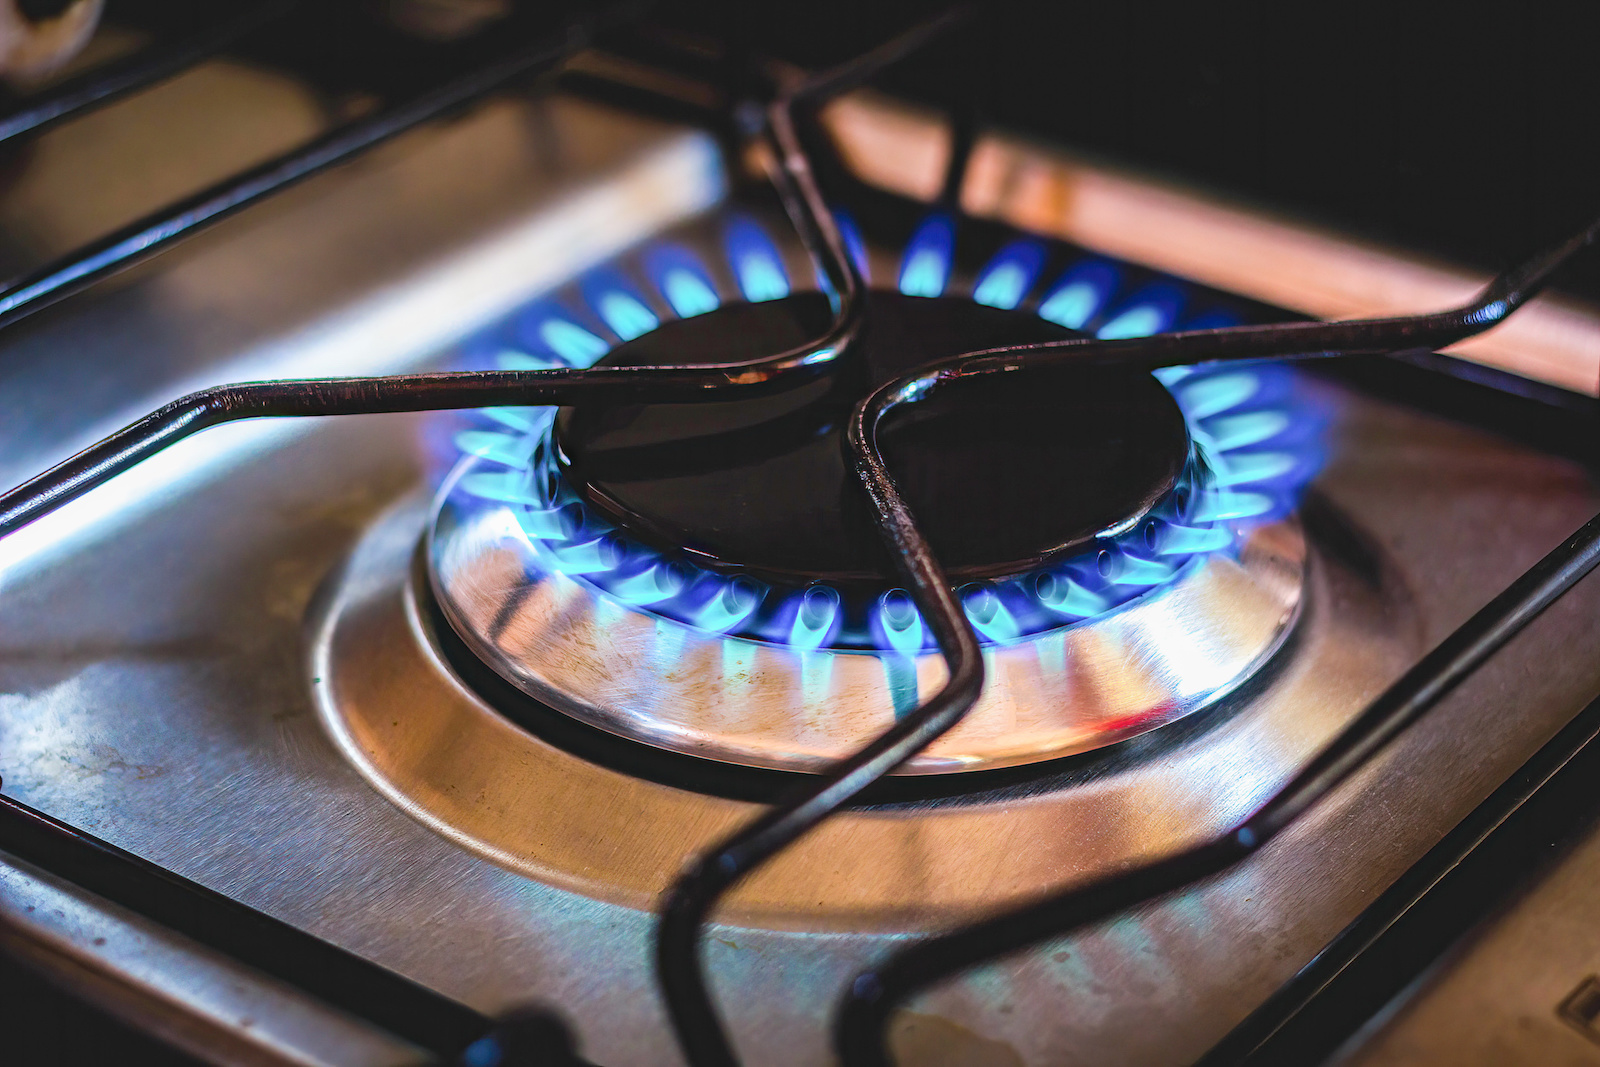 A gas stove ban could help climate and health problems. But regulations  won't be immediate. - Vox